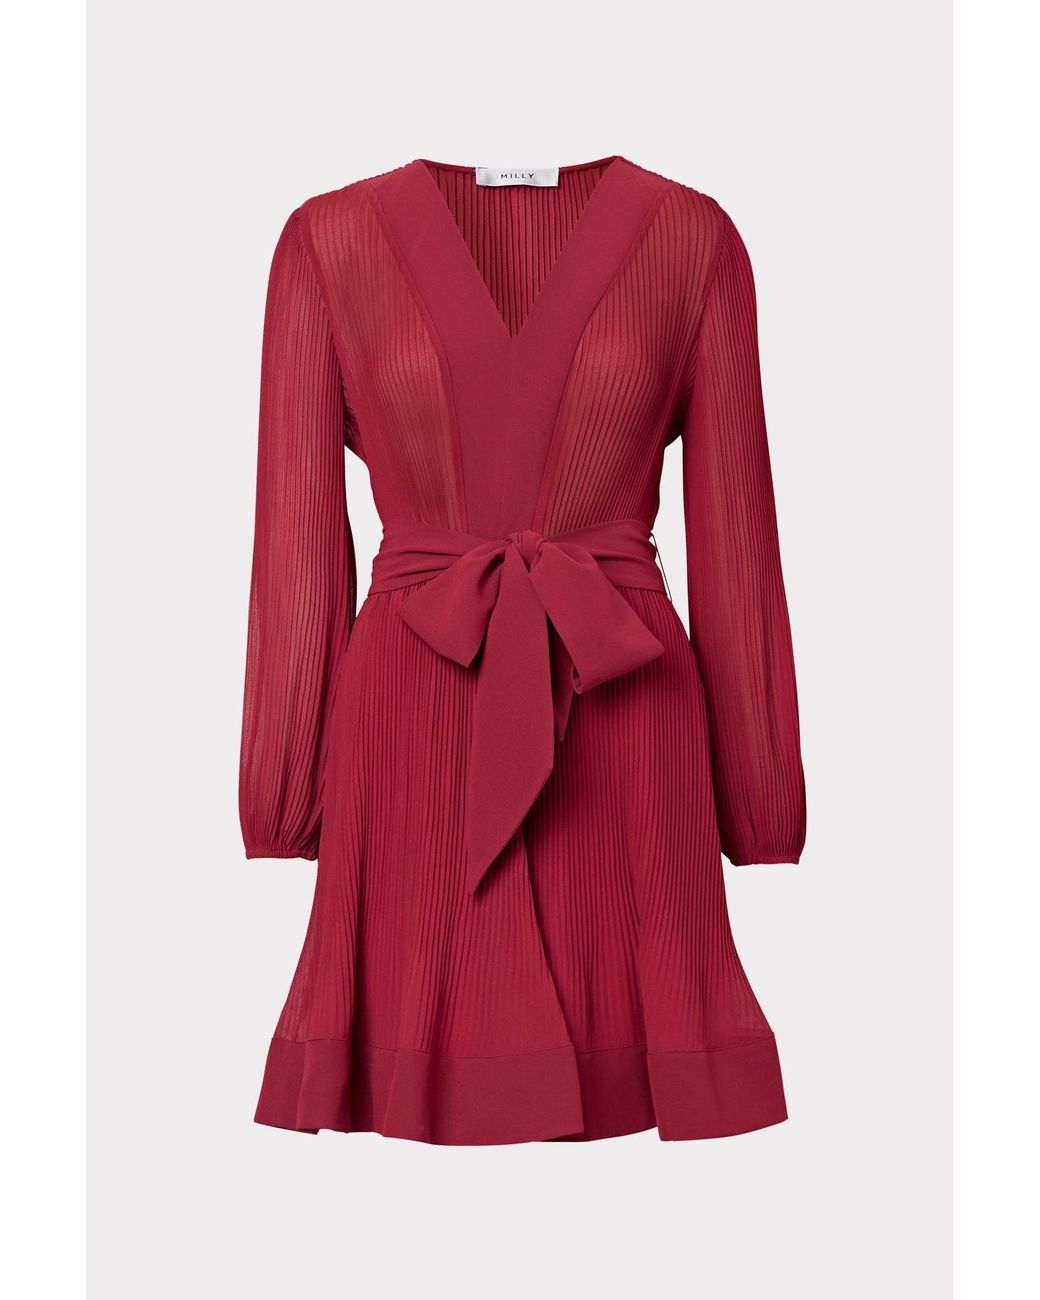 MILLY Liv Pleated Dress in Raspberry (Red) | Lyst